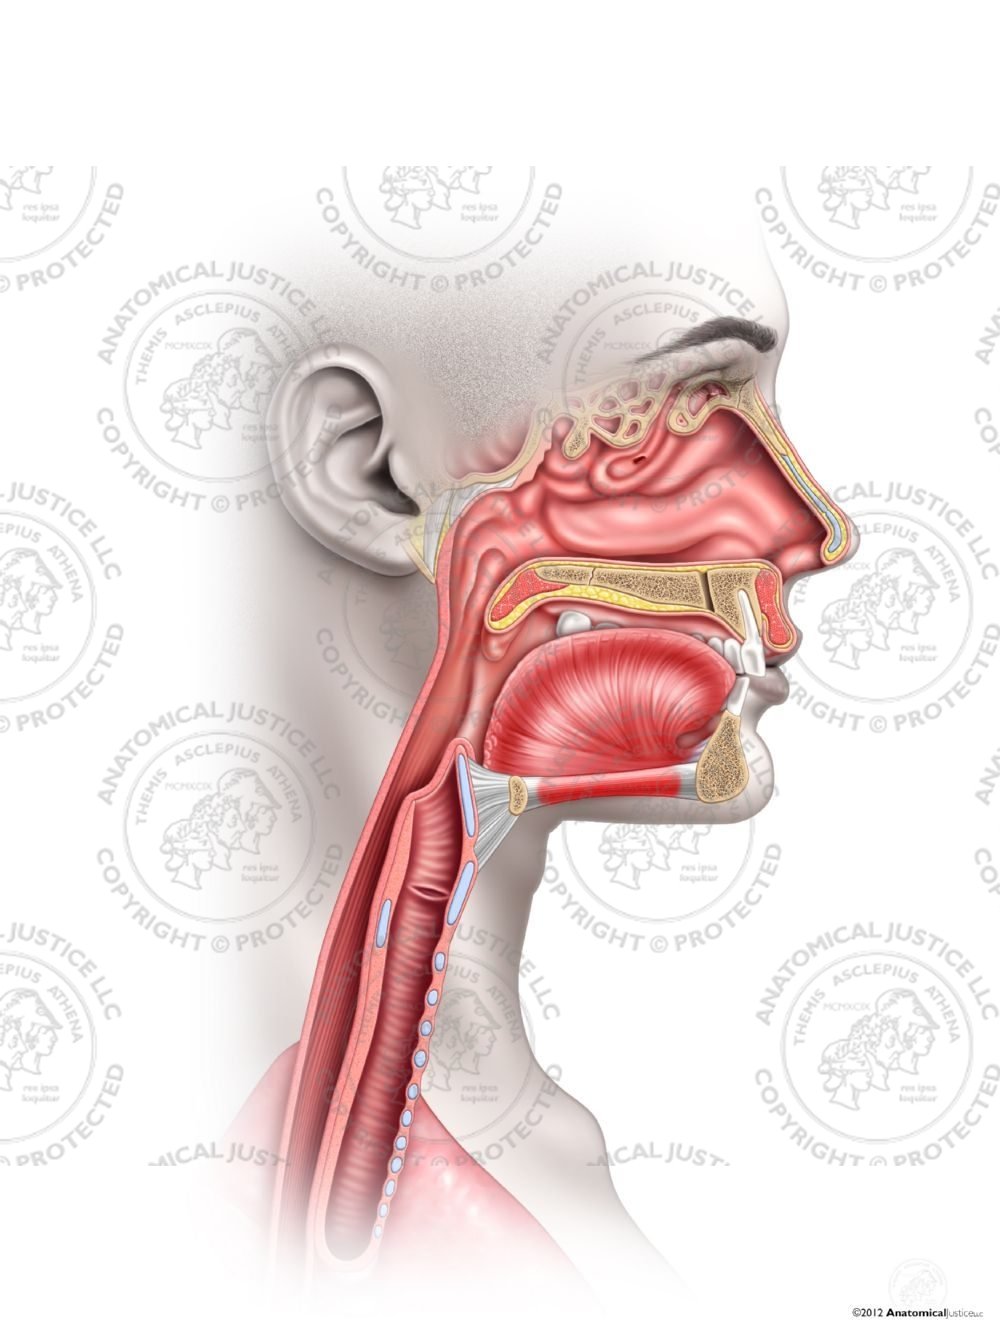 Normal Female Anatomy of the Right Throat – No Text